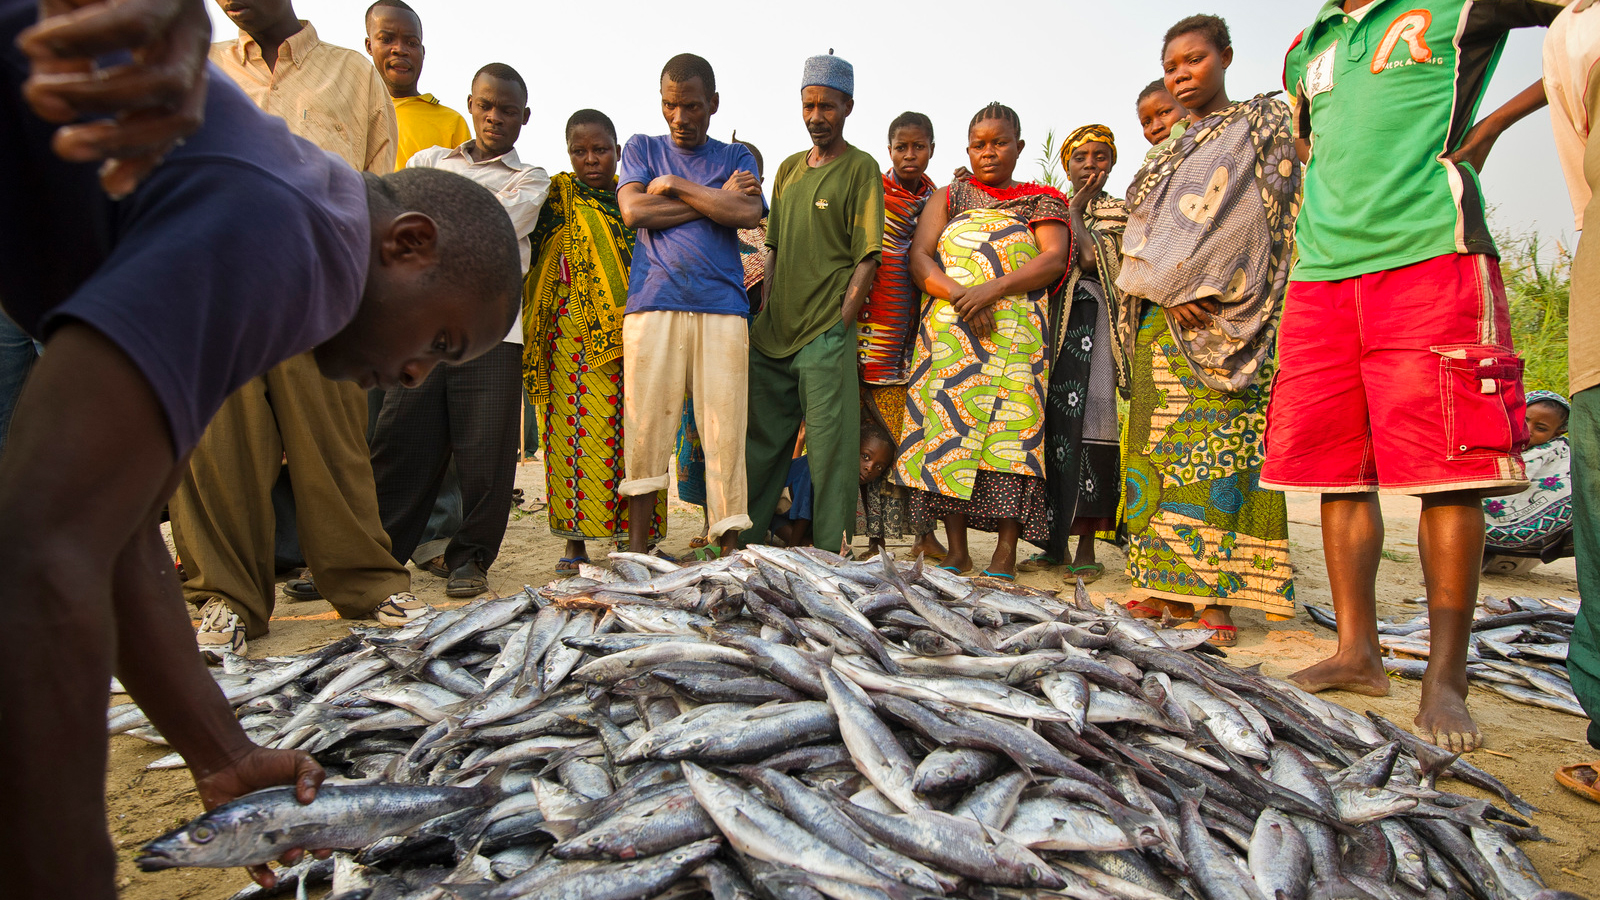 Local village fisherman work to catch barely enough fish to make a living selling to the local market in the village of Katumbi on Lake Tanganyika in Tanzania. Photo © Ami Vitale